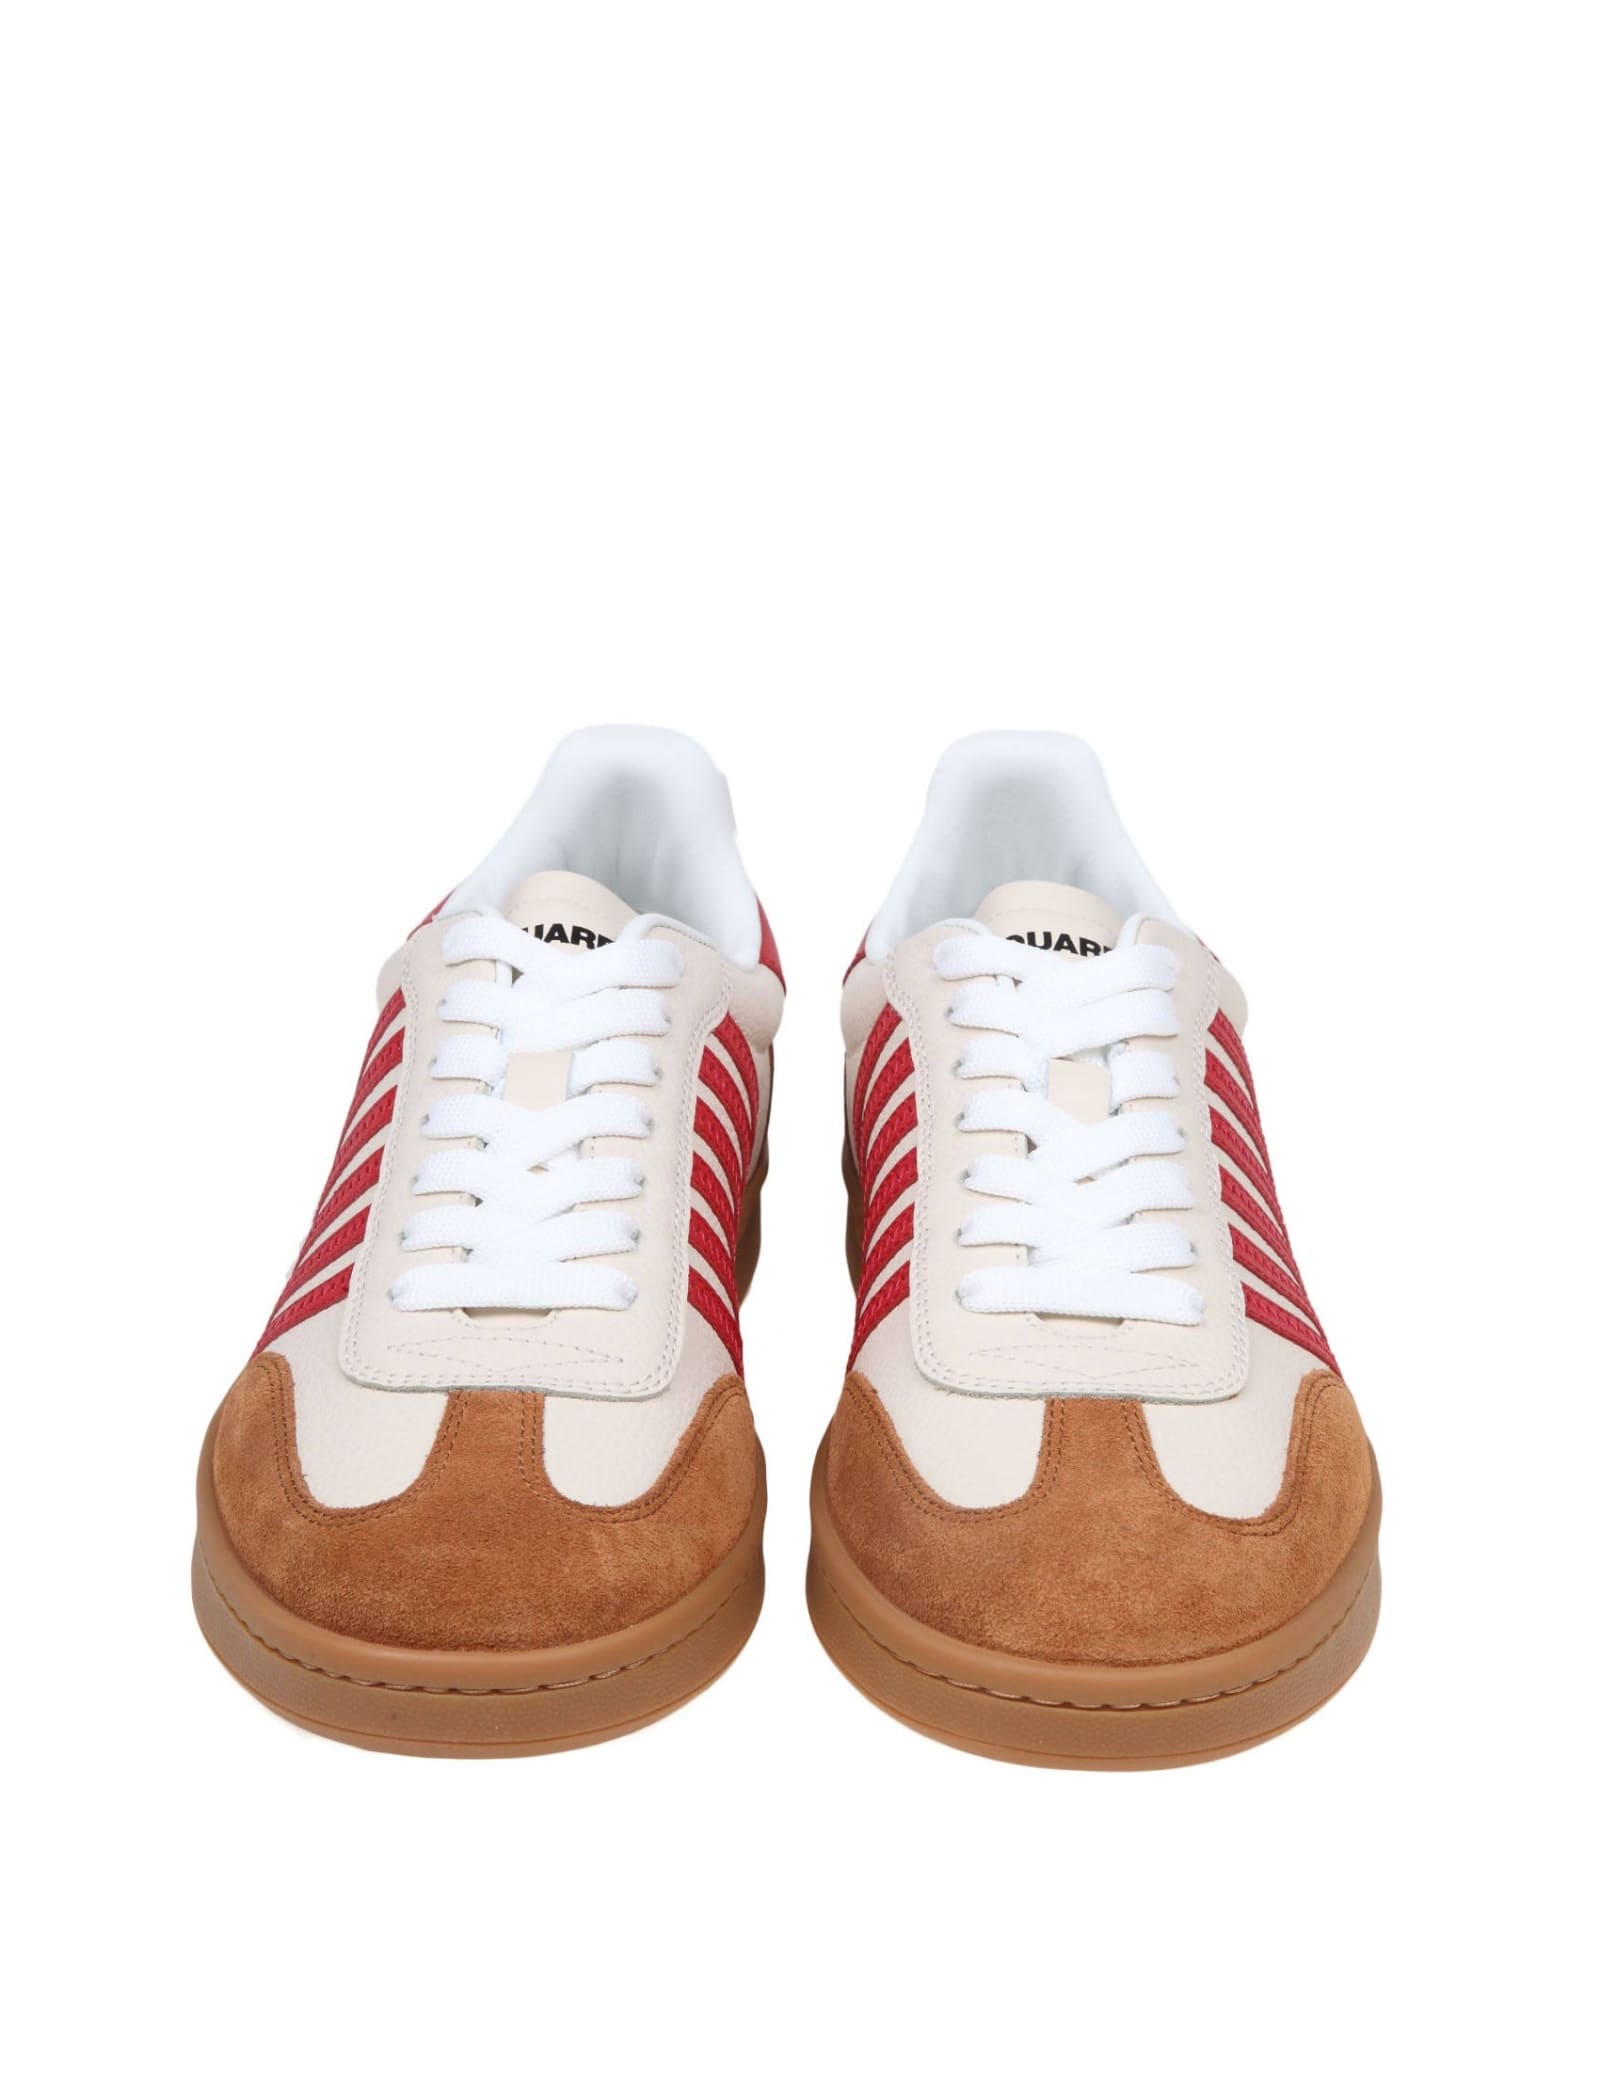 Shop Dsquared2 Boxer Sneakers In White/red Leather And Suede